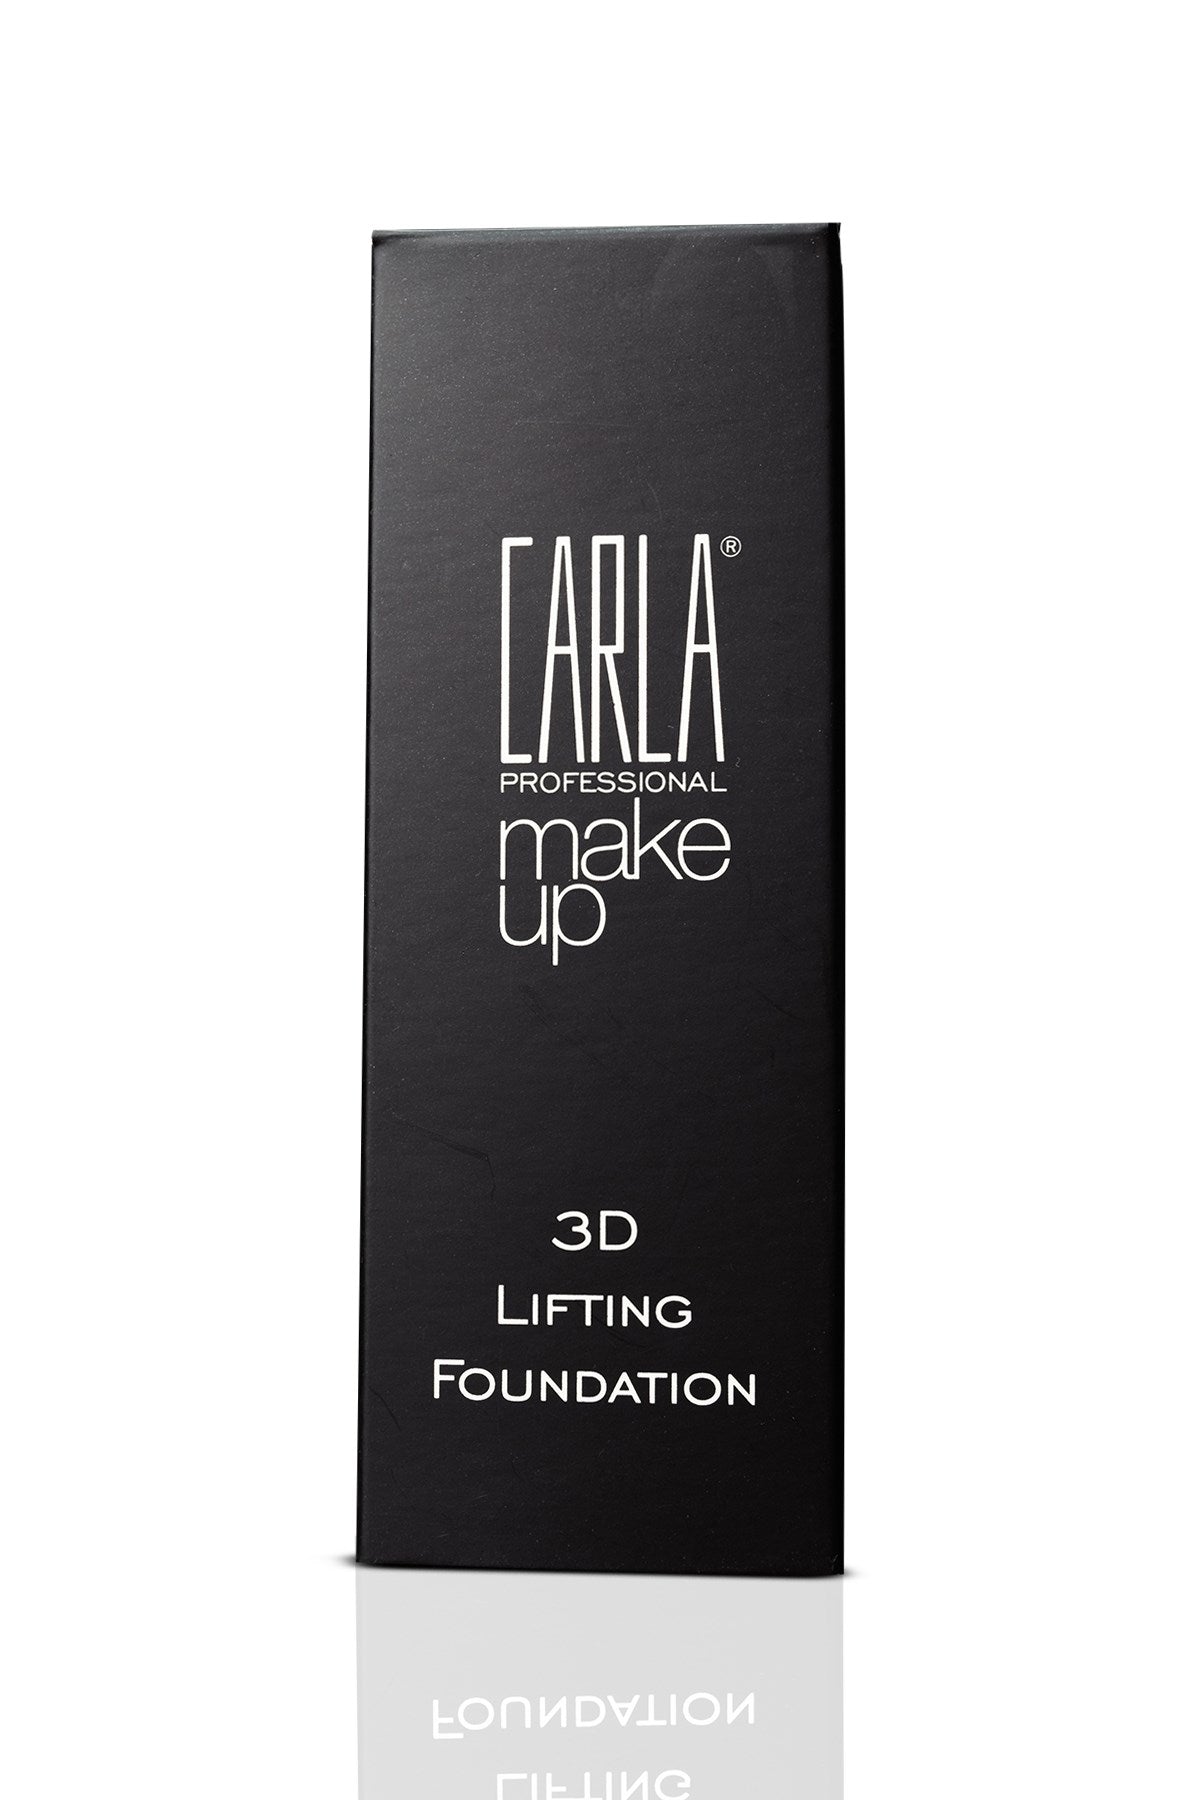 Carla 3D Lifting Foundation - Revive Your Radiance and Combat Aging with Light-Reflecting Magic!